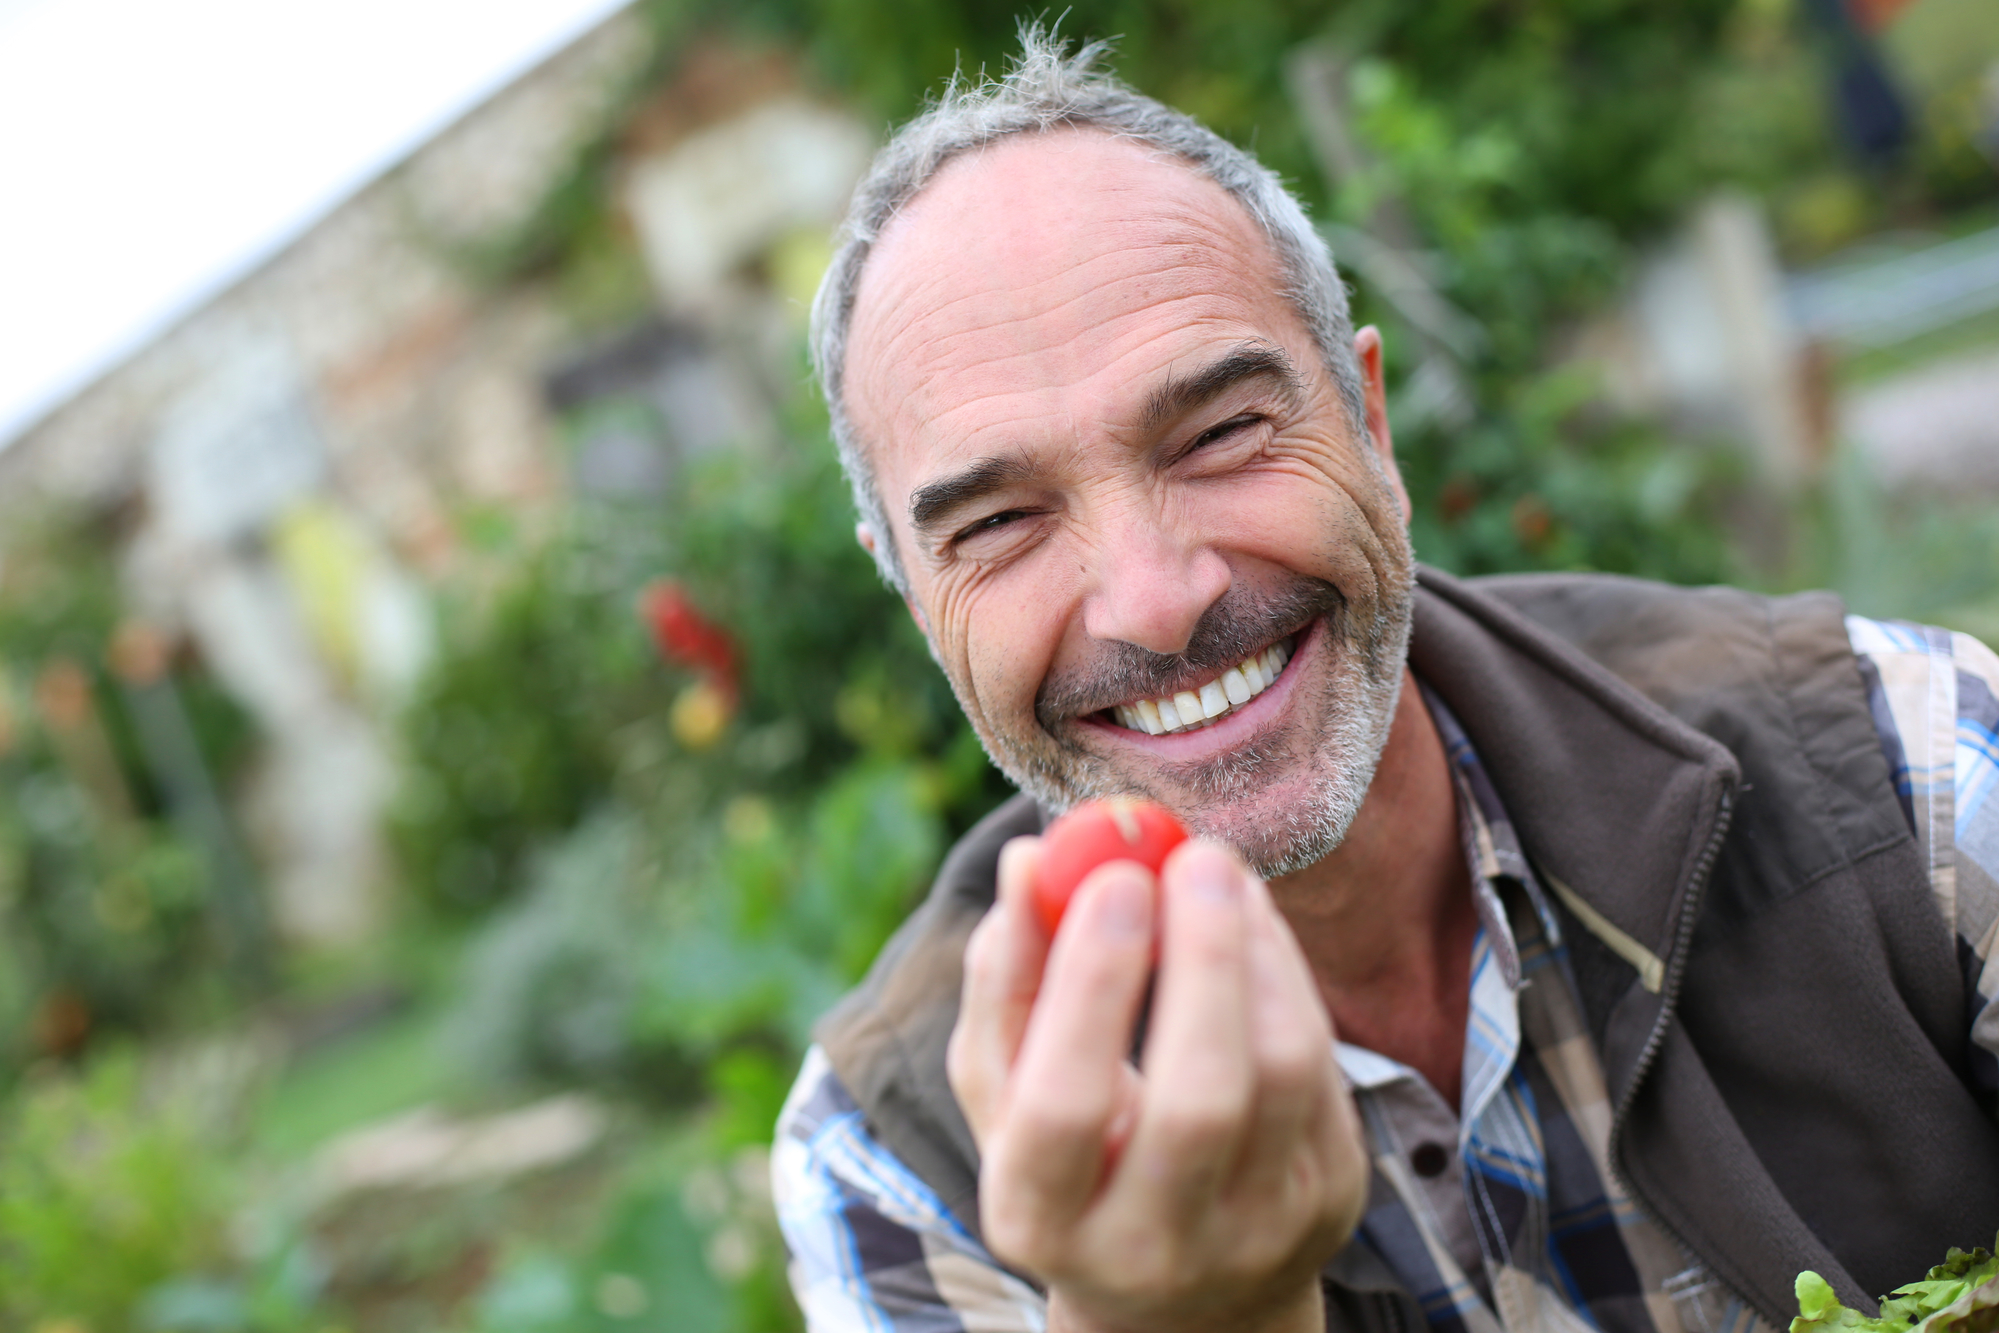 Cheerful senior man showing tomatoes from garden